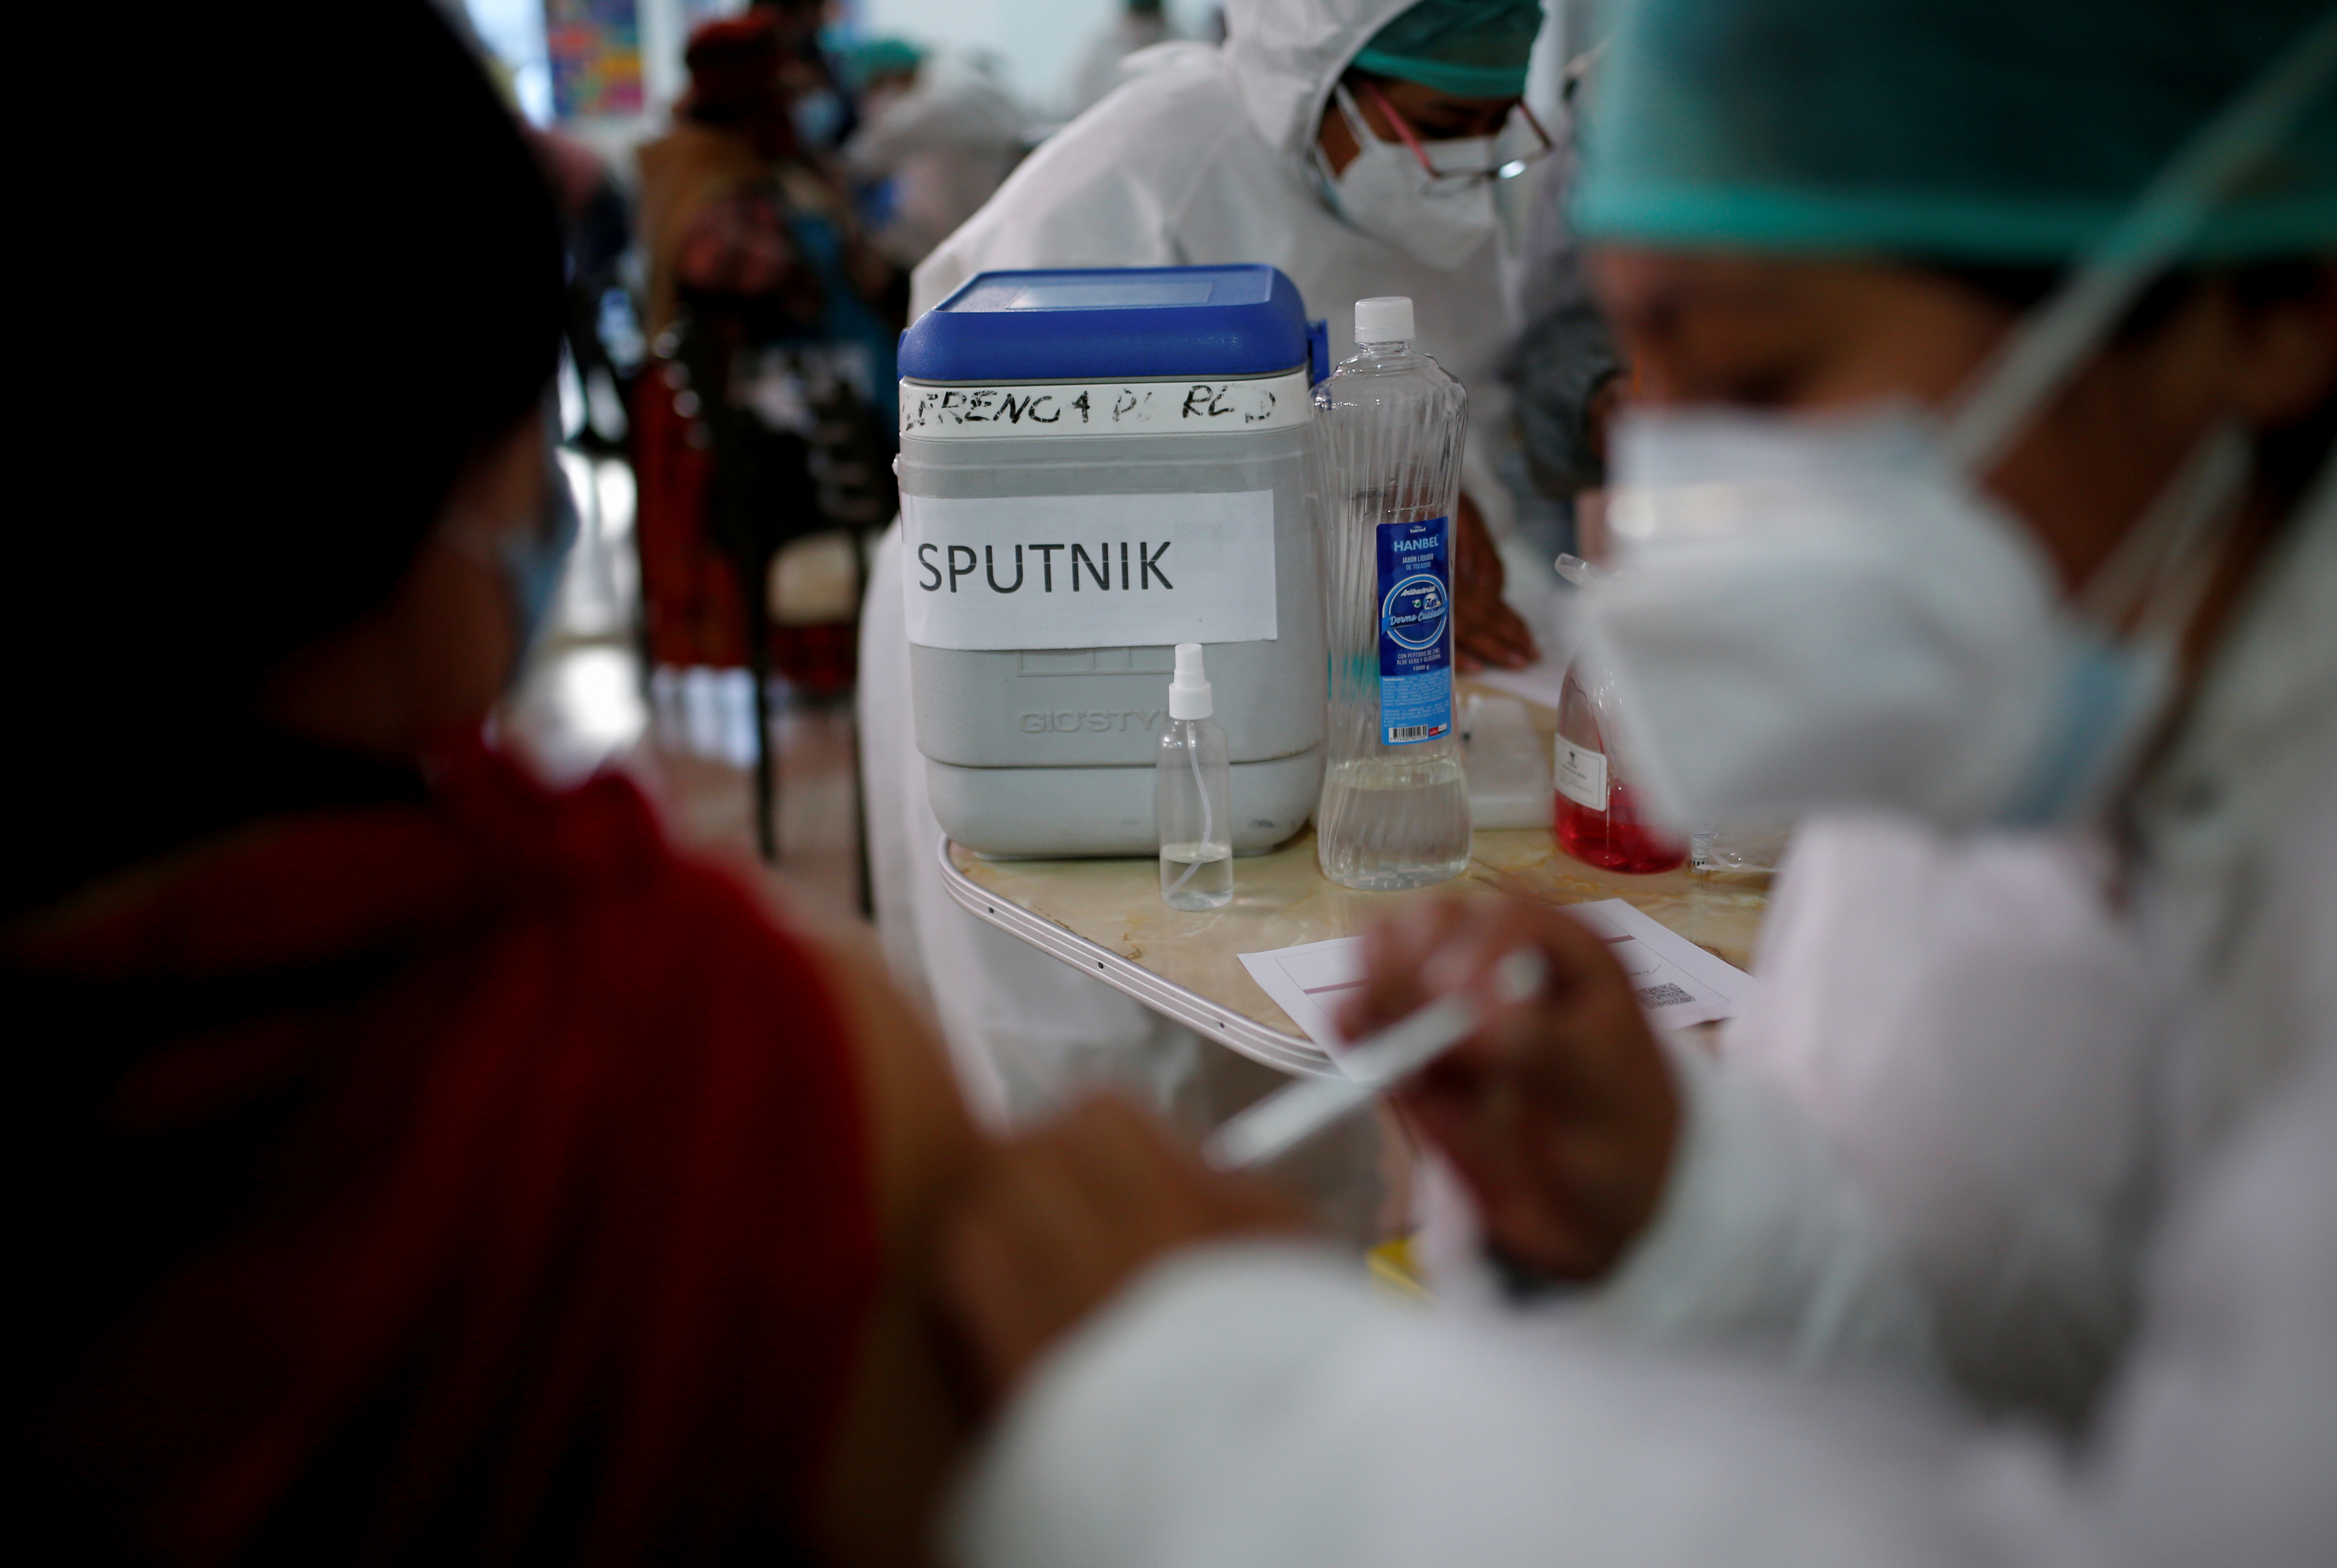 A person receives Russia's Sputnik V vaccine against the coronavirus disease (COVID-19) at a Mi Teleferico cable car station turned into a vaccination centre, in El Alto, Bolivia July 25, 2021. REUTERS/Manuel Claure